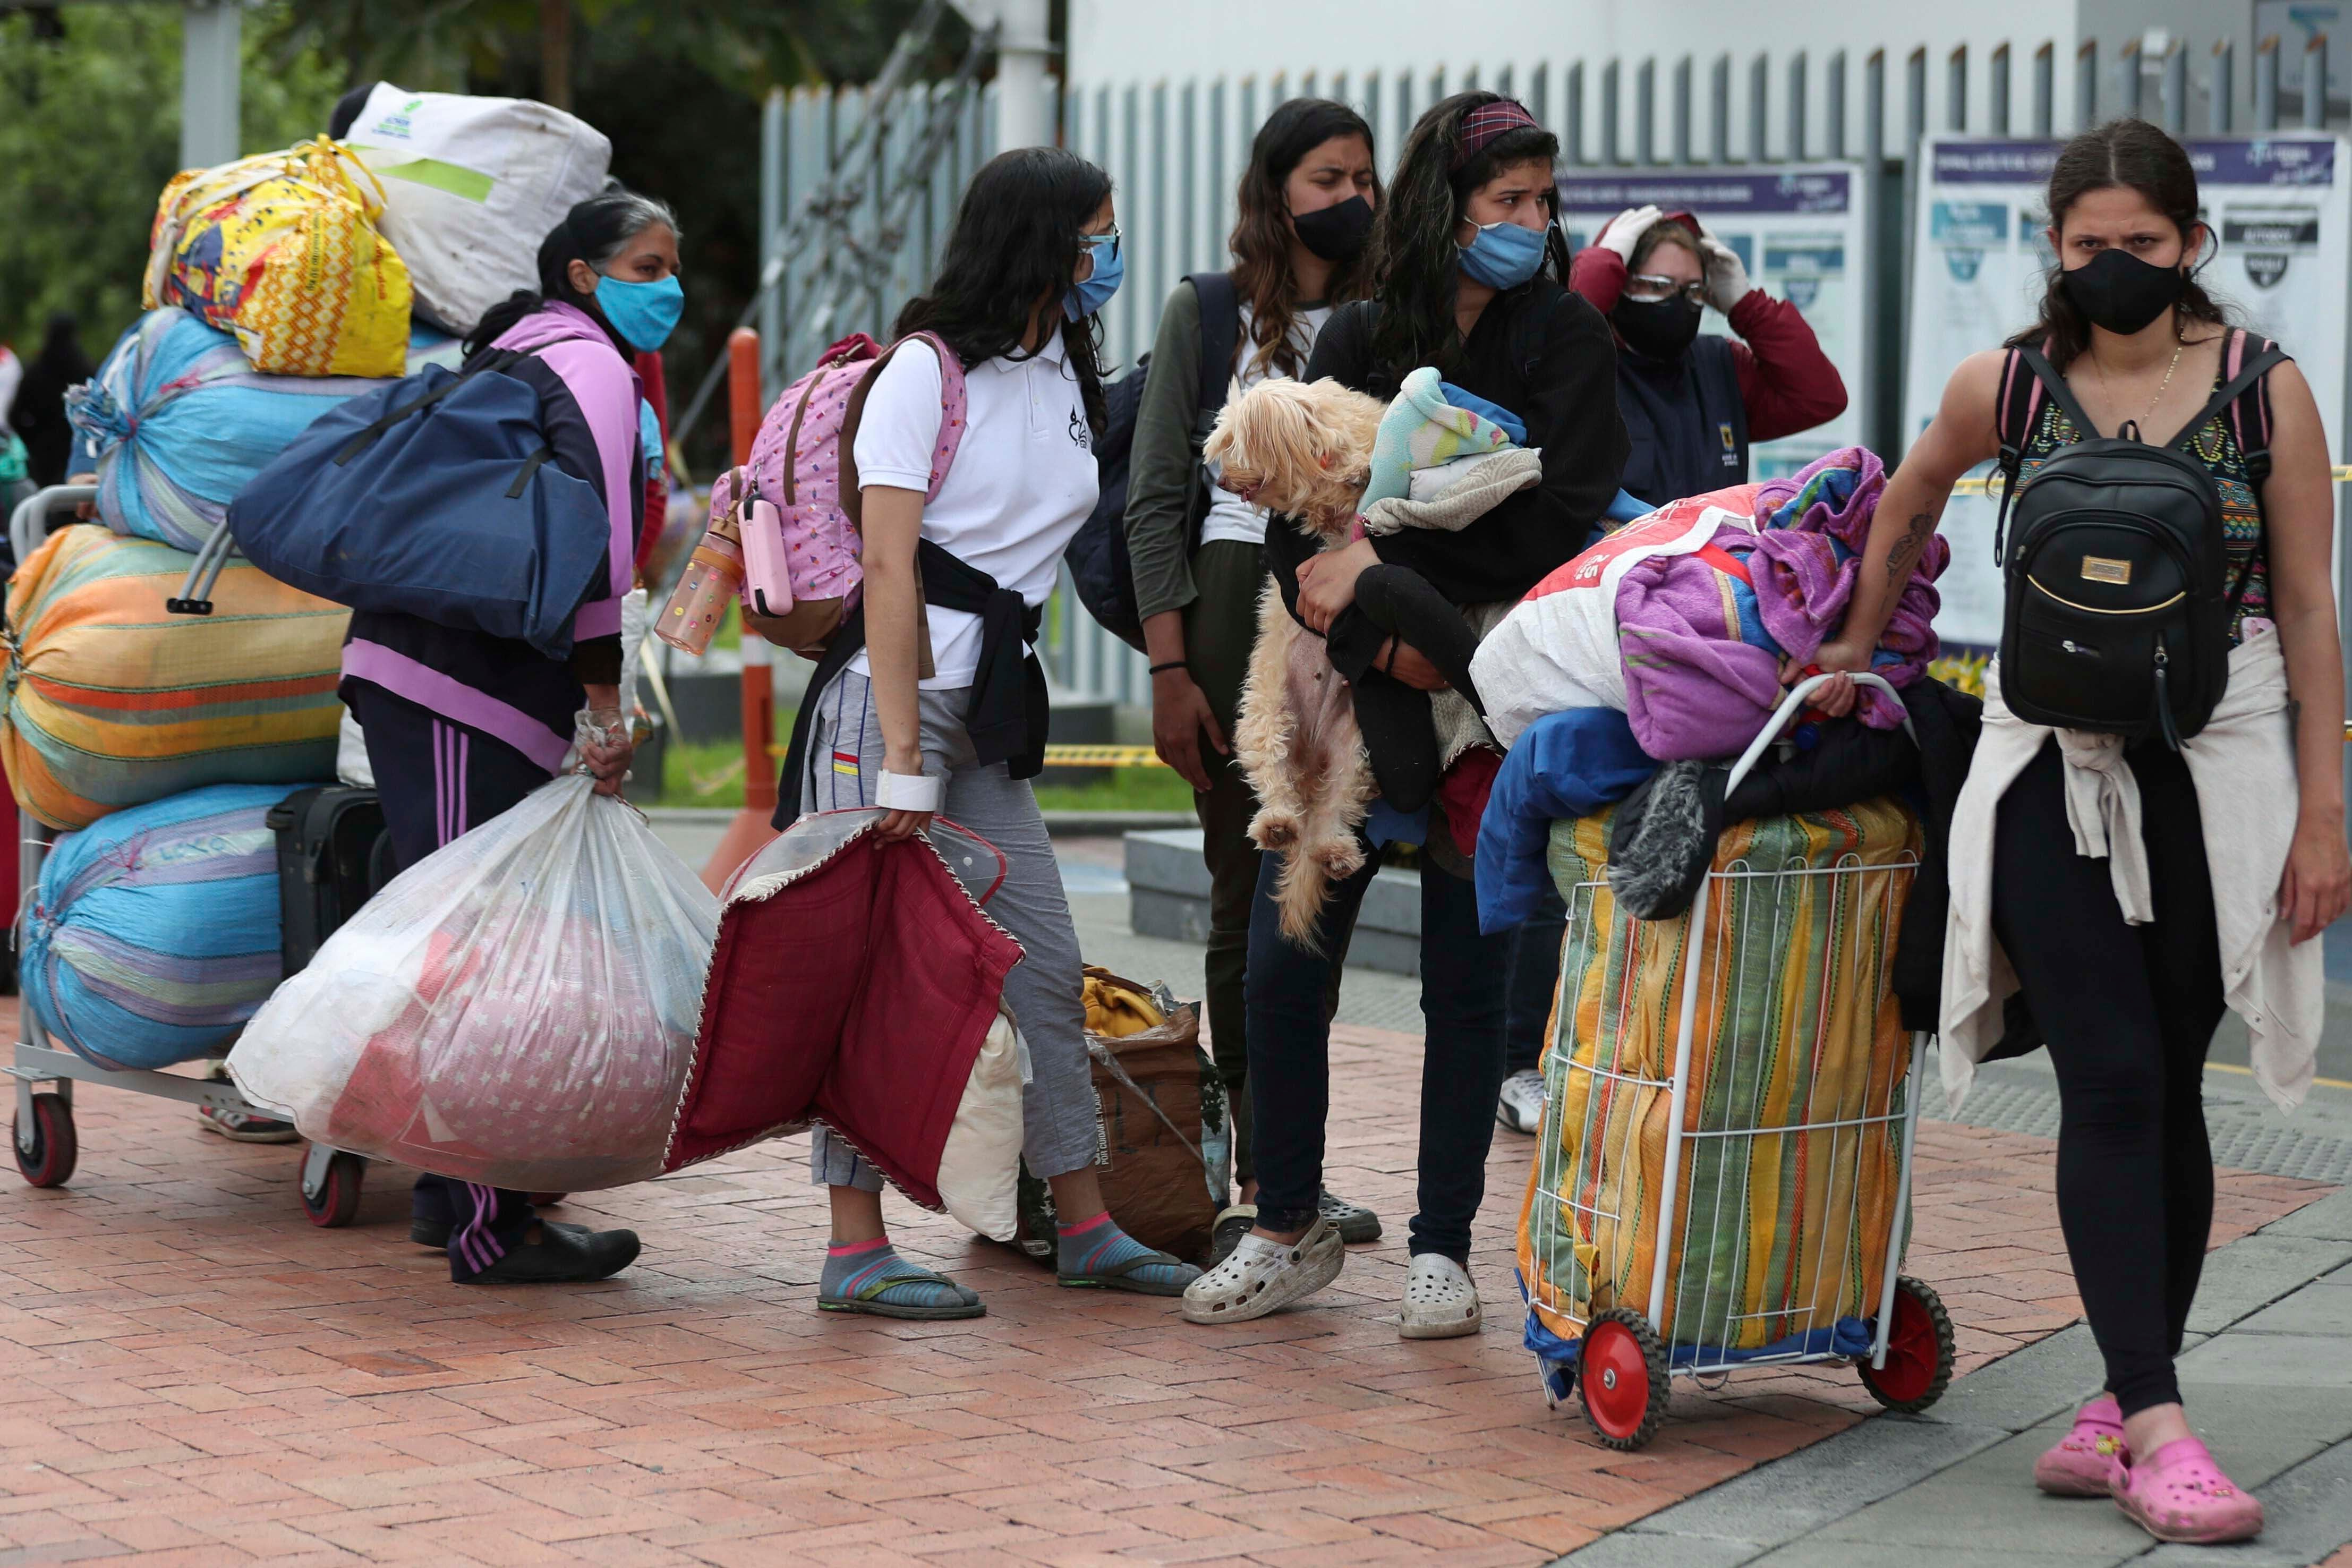 Venezuelan migrants wait for a bus in Bogota, Colombia, to travel to the border with Venezuela during the Covid-19 pandemic, on Thursday, July 2, 2020.